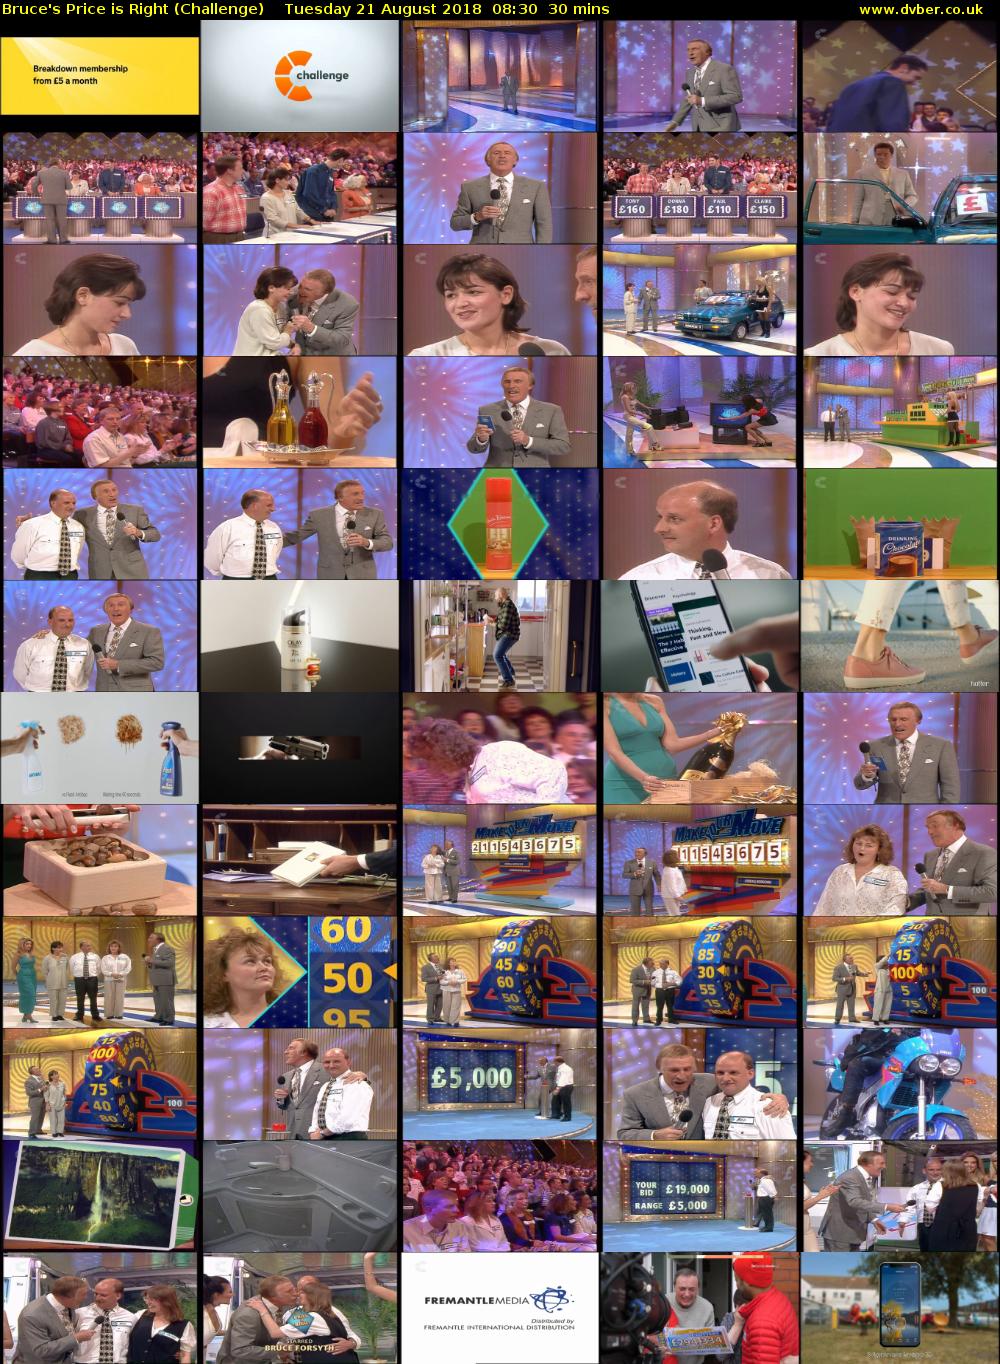 Bruce's Price is Right (Challenge) Tuesday 21 August 2018 08:30 - 09:00